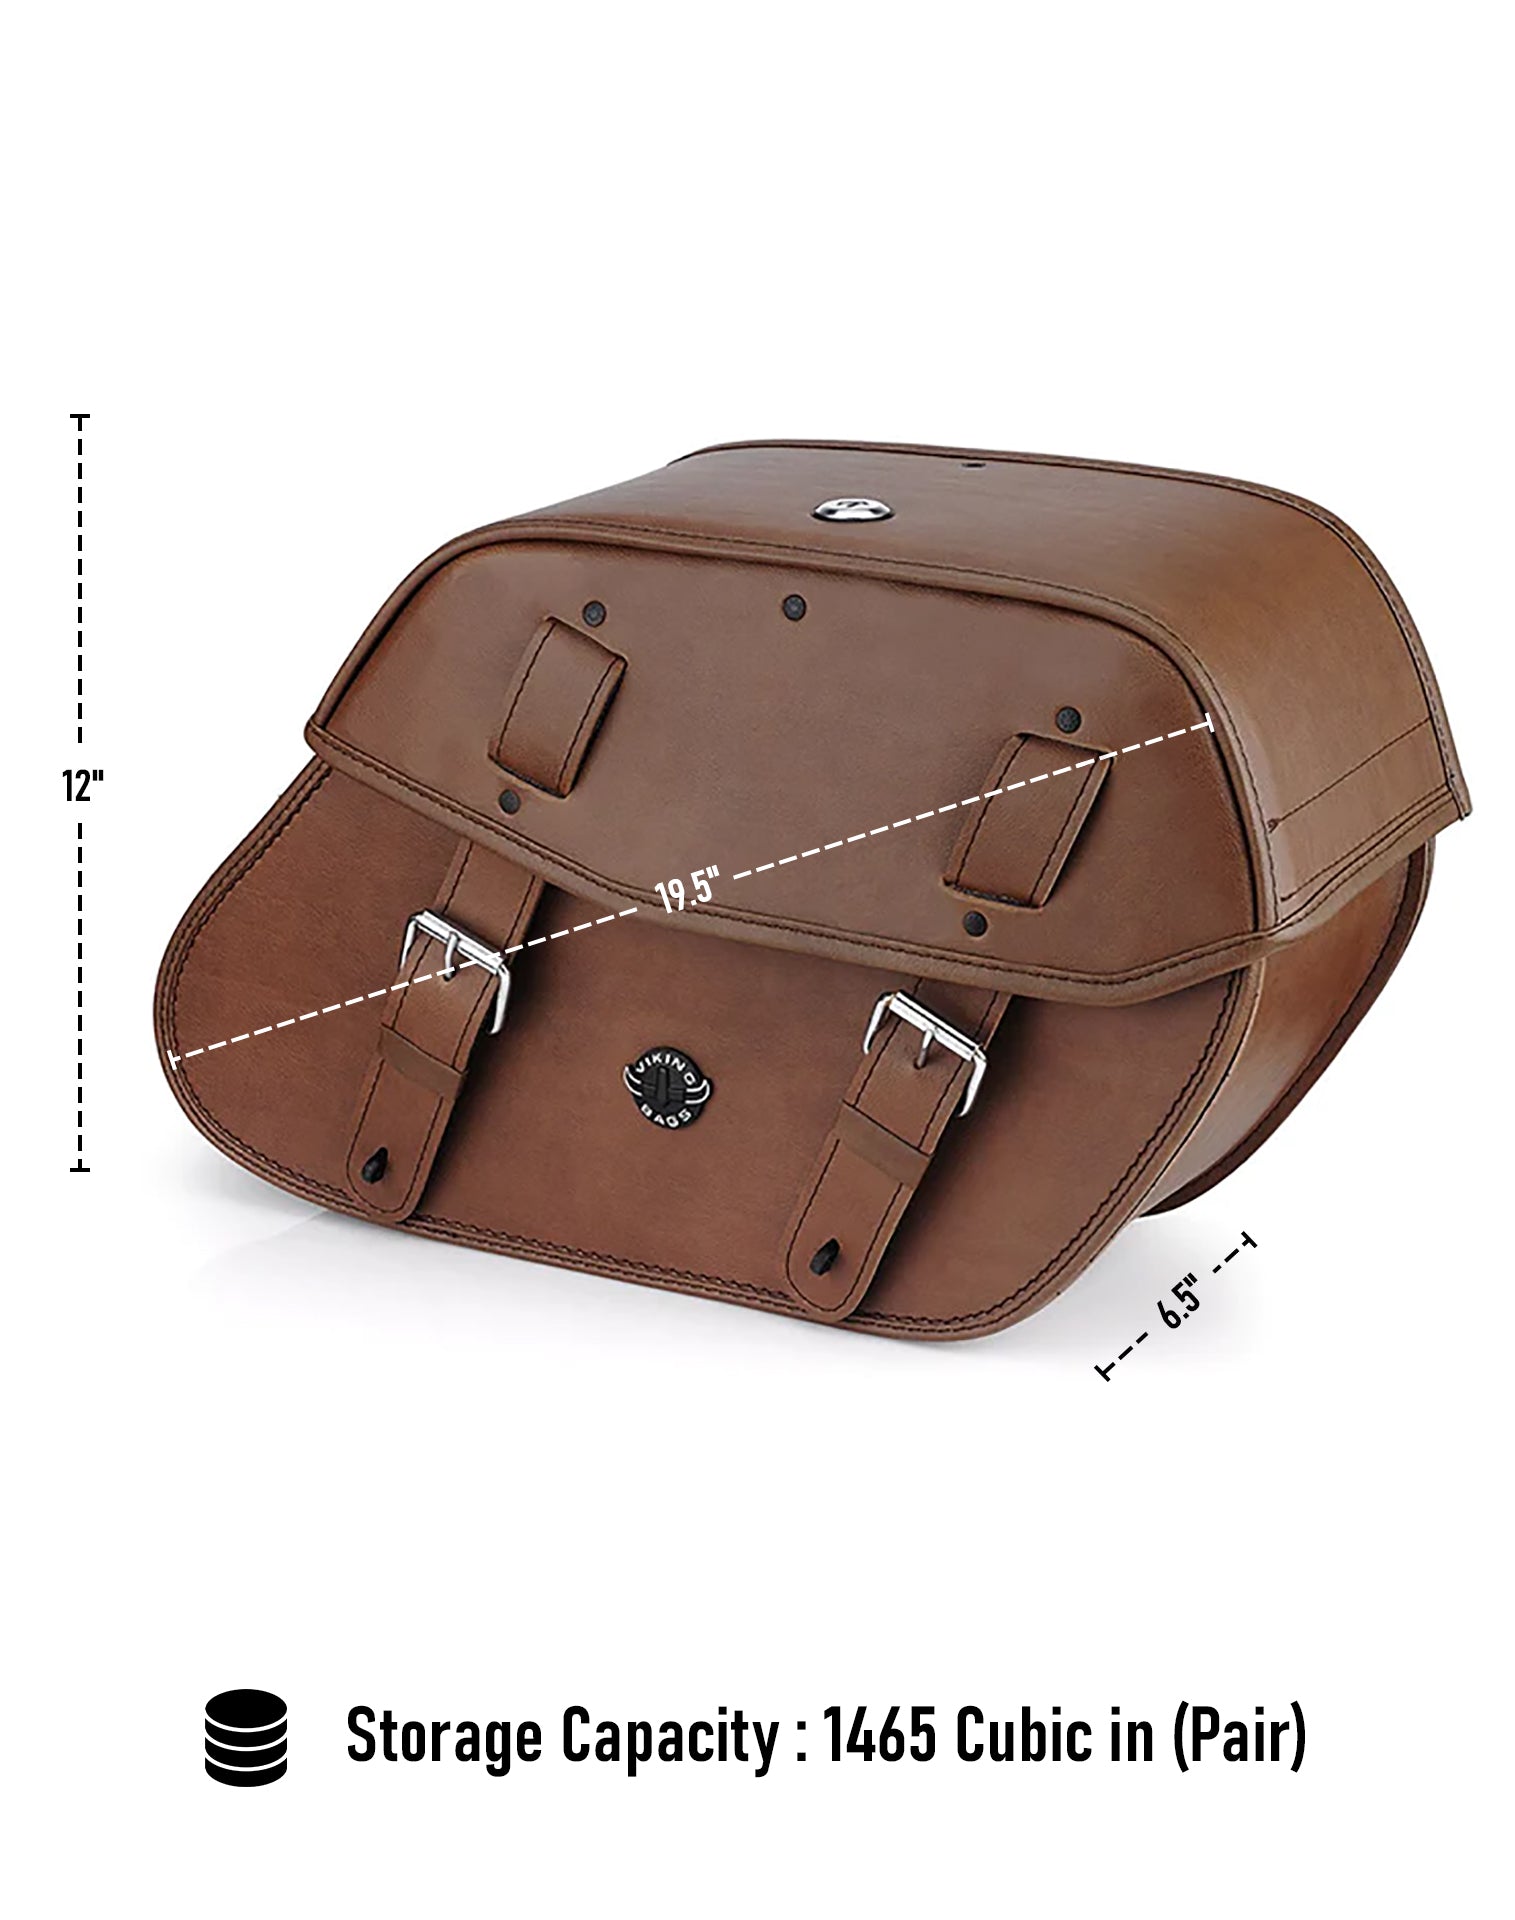 Viking Odin Brown Large Suzuki Boulevard C109 Leather Motorcycle Saddlebags Can Store Your Ridings Gears